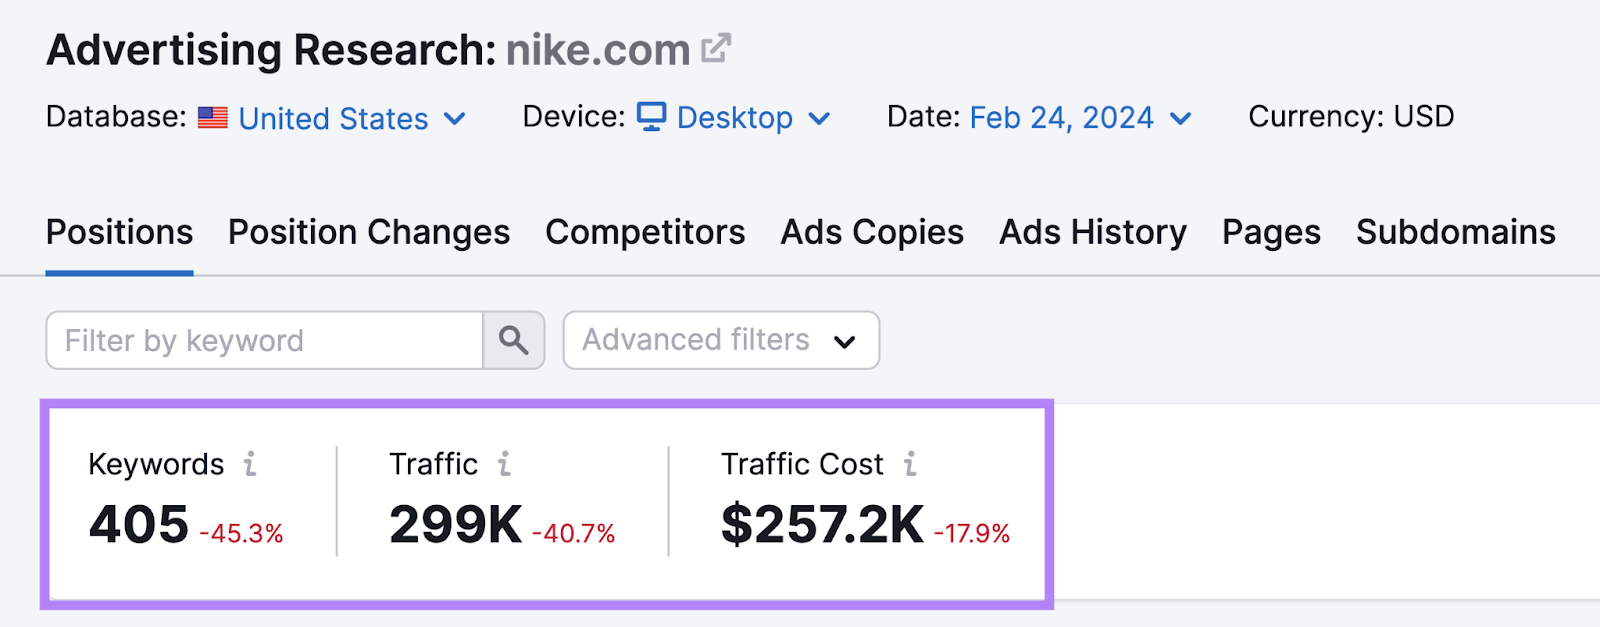 "Keyword," "Traffic," and "Total Cost" metrics for "nike.com" successful  Advertising Research tool